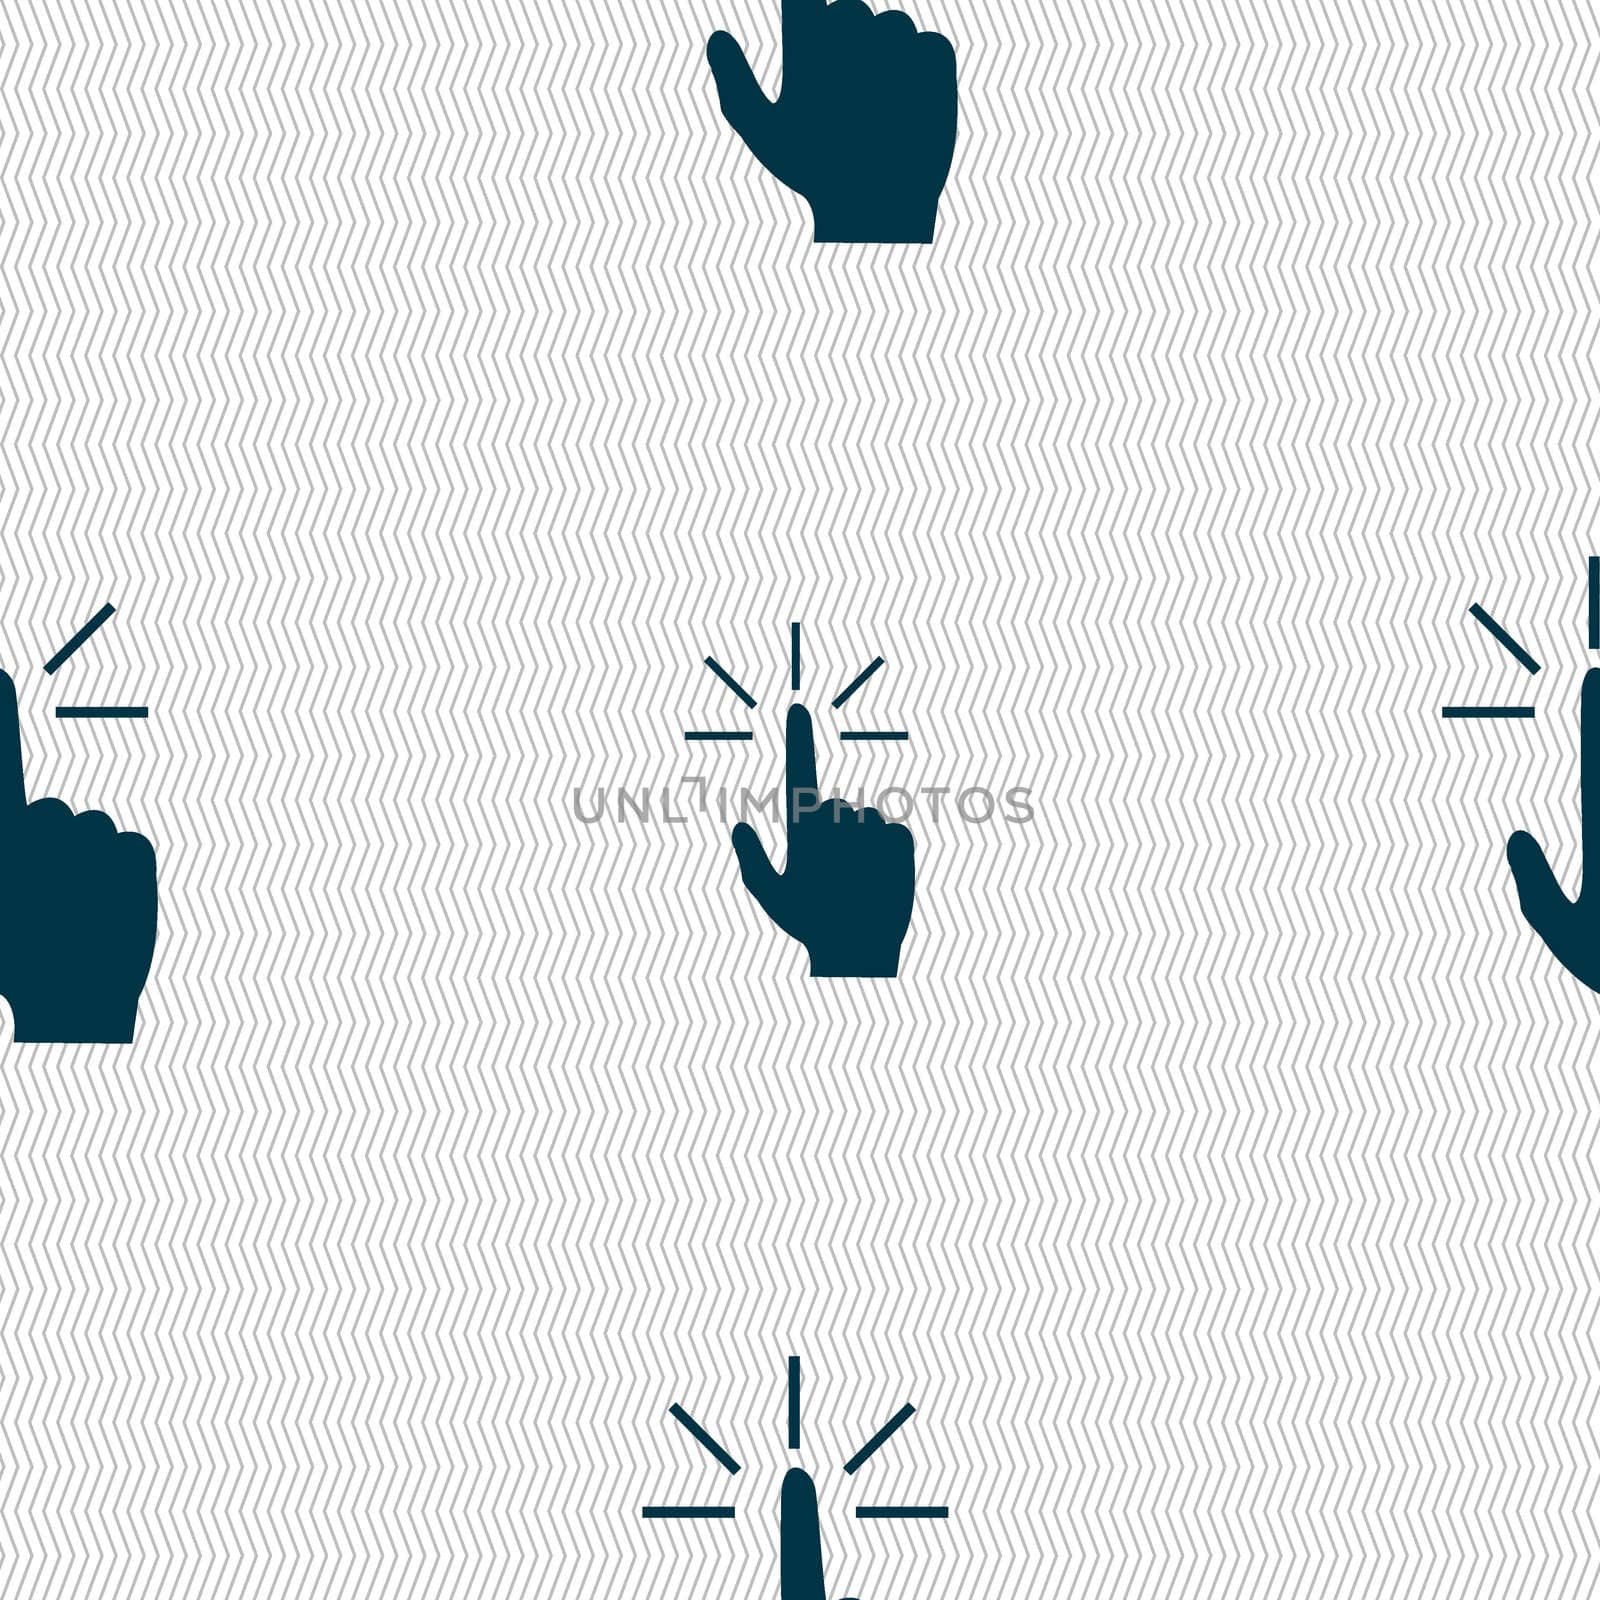 Click here hand icon sign. Seamless abstract background with geometric shapes. illustration